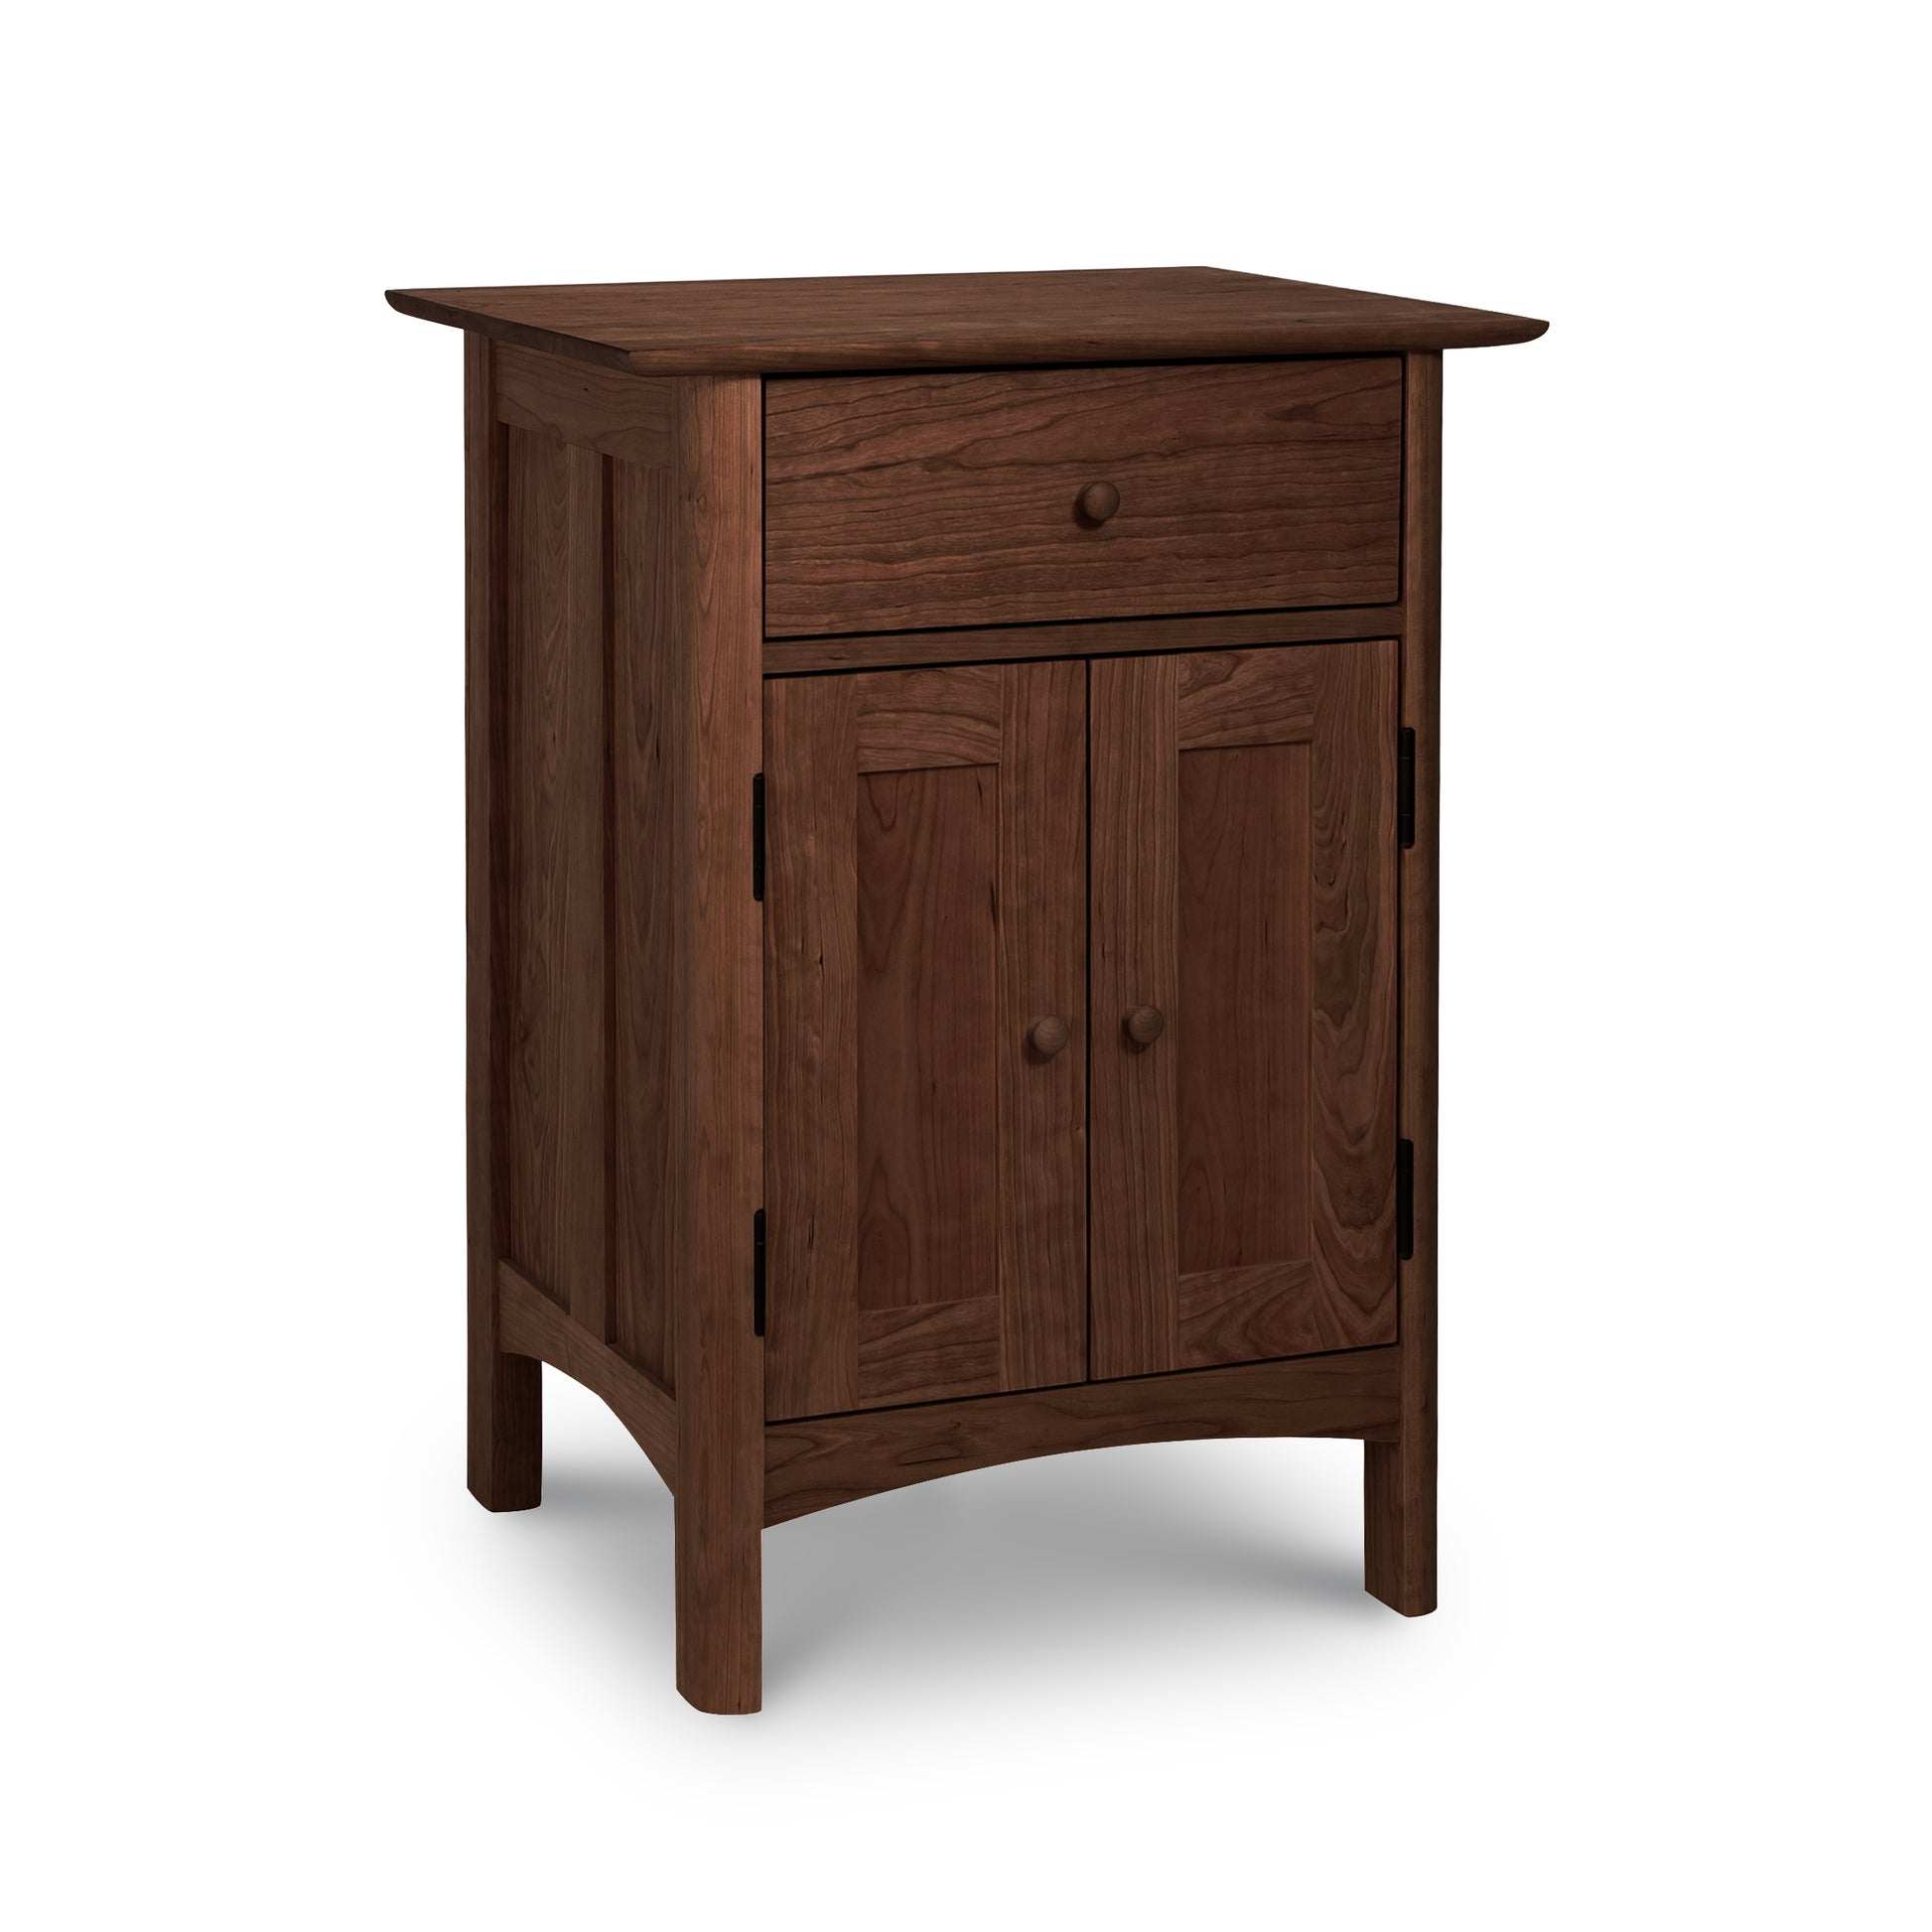 A Heartwood Shaker Short Storage Chest by Vermont Furniture Designs, offering ample storage with two drawers and a door.